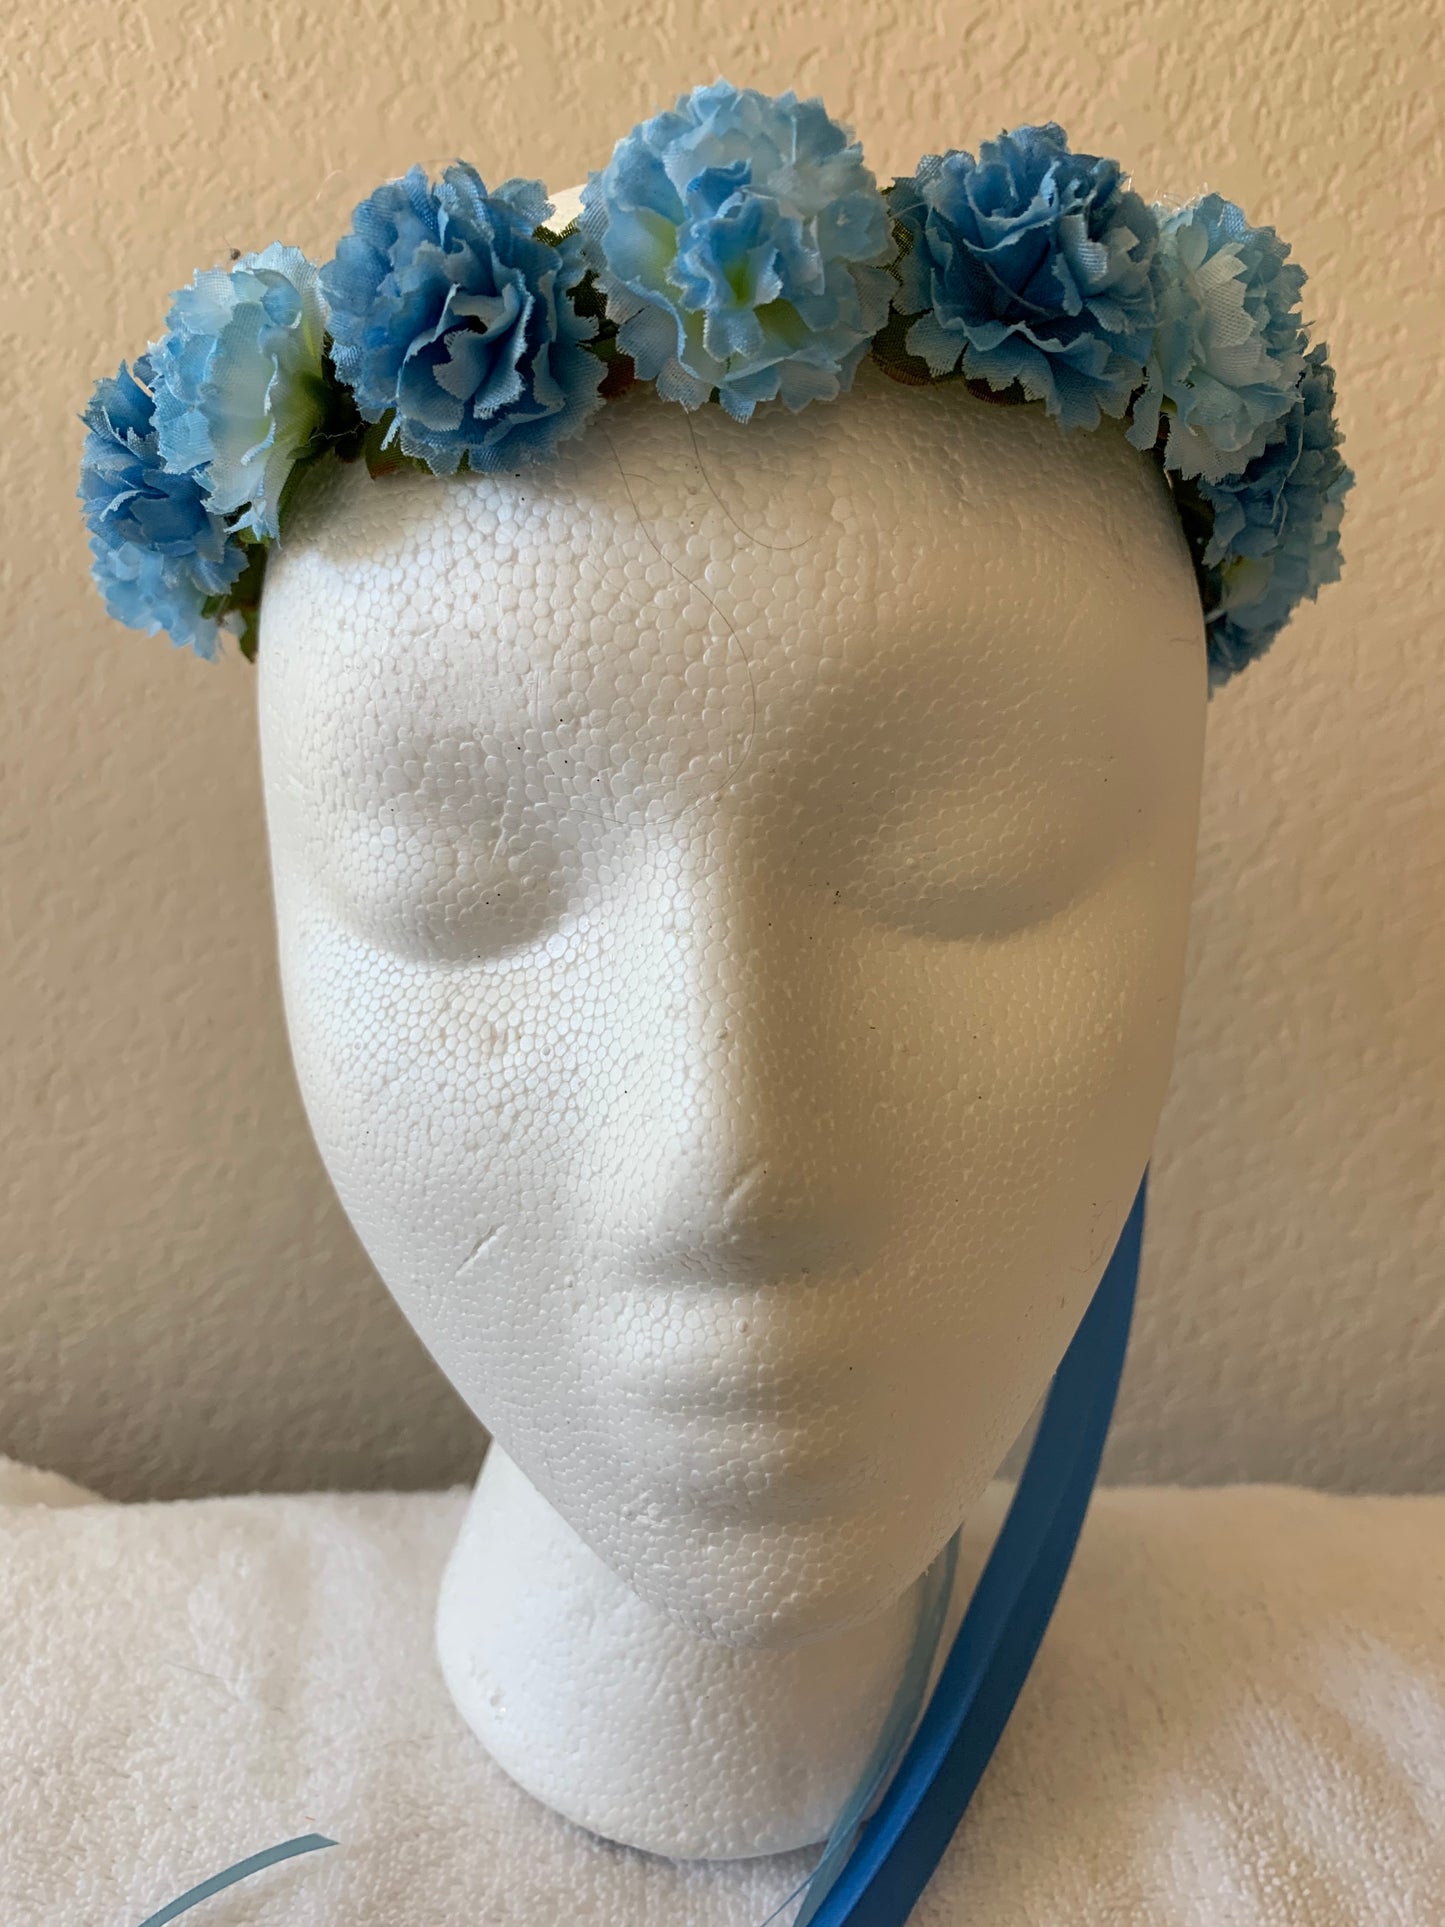 Extra Small Wreath - Two Toned Blue Pom Poms